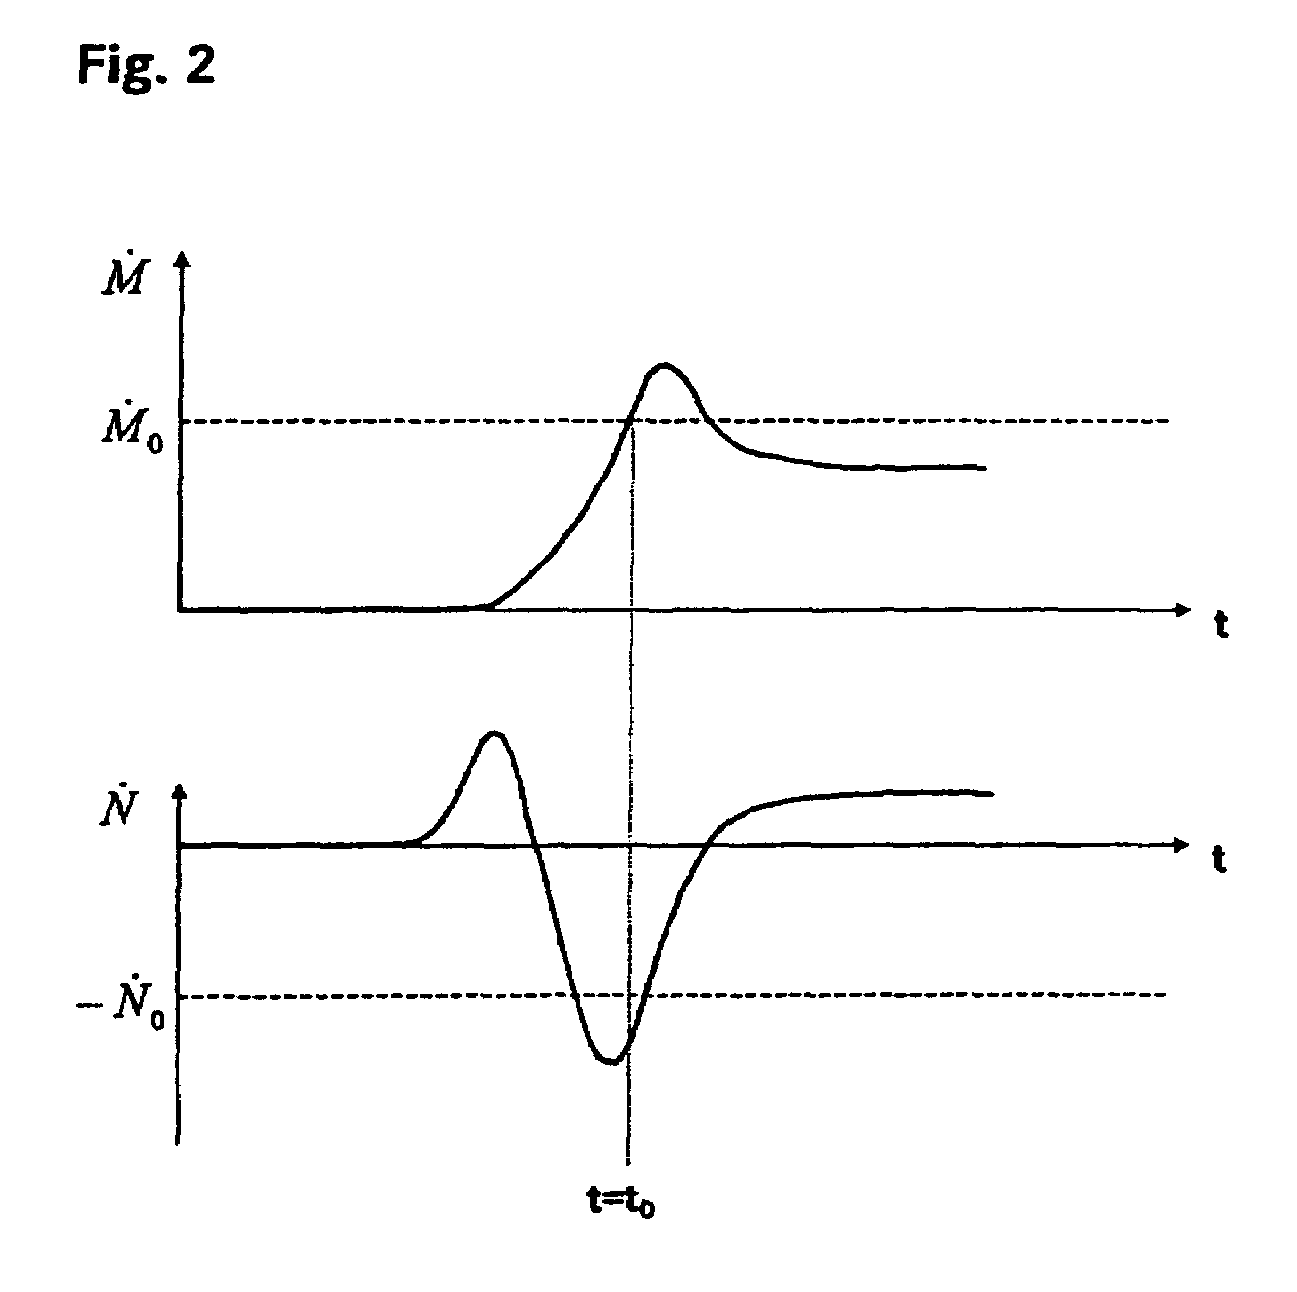 Method and device for detecting the initiation of the driving off process by a driver of a vehicle